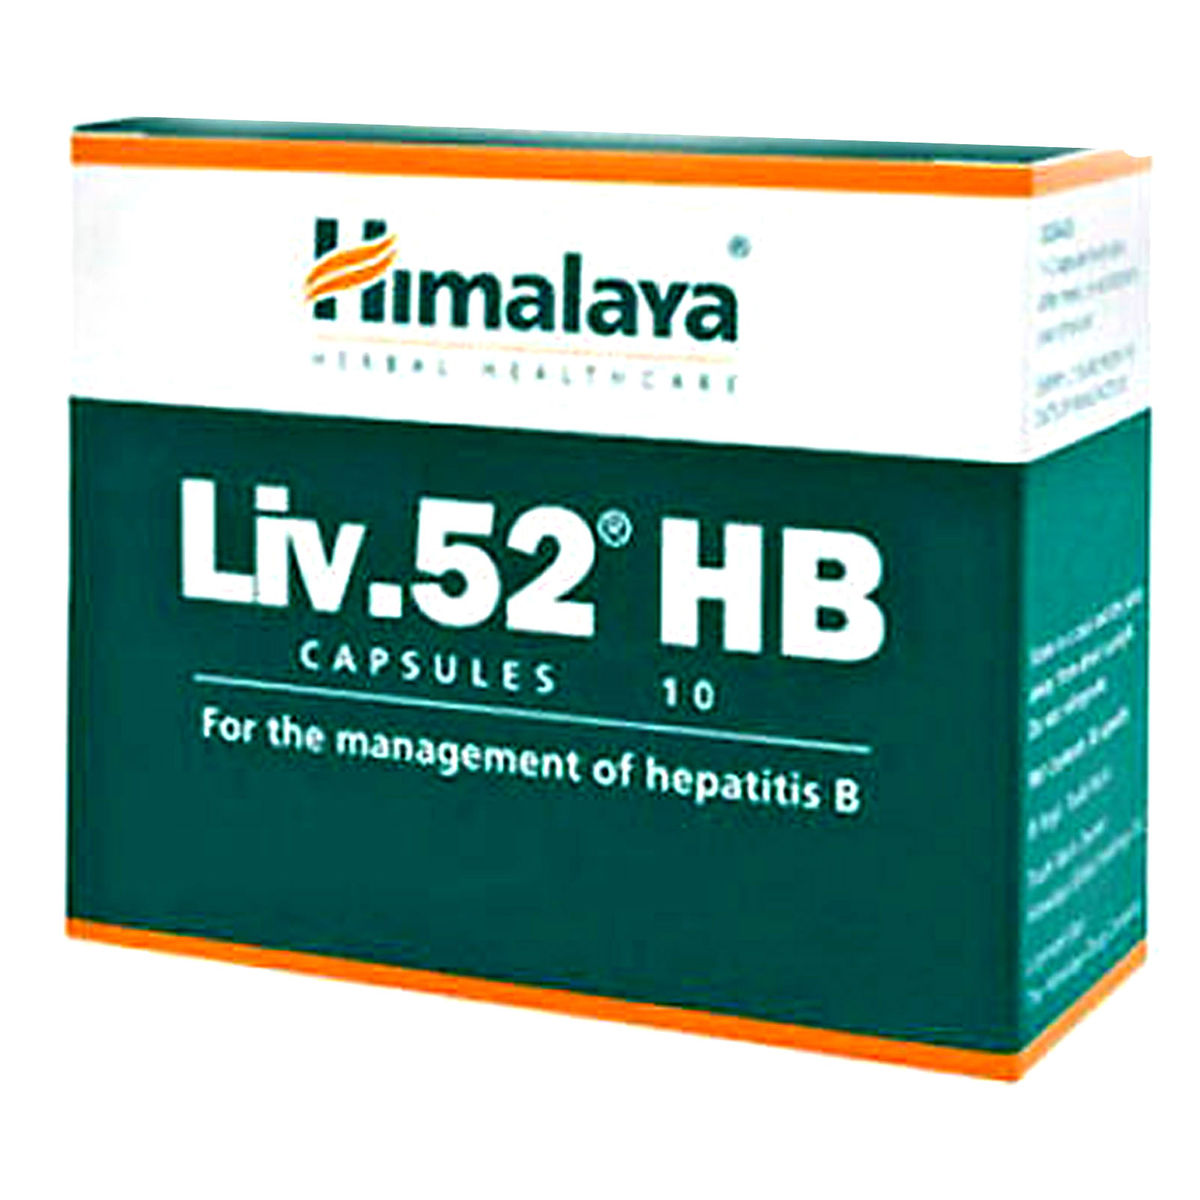 Himalaya Liv.52 Hb, 10 Capsules Price, Uses, Side Effects, Composition -  Apollo Pharmacy